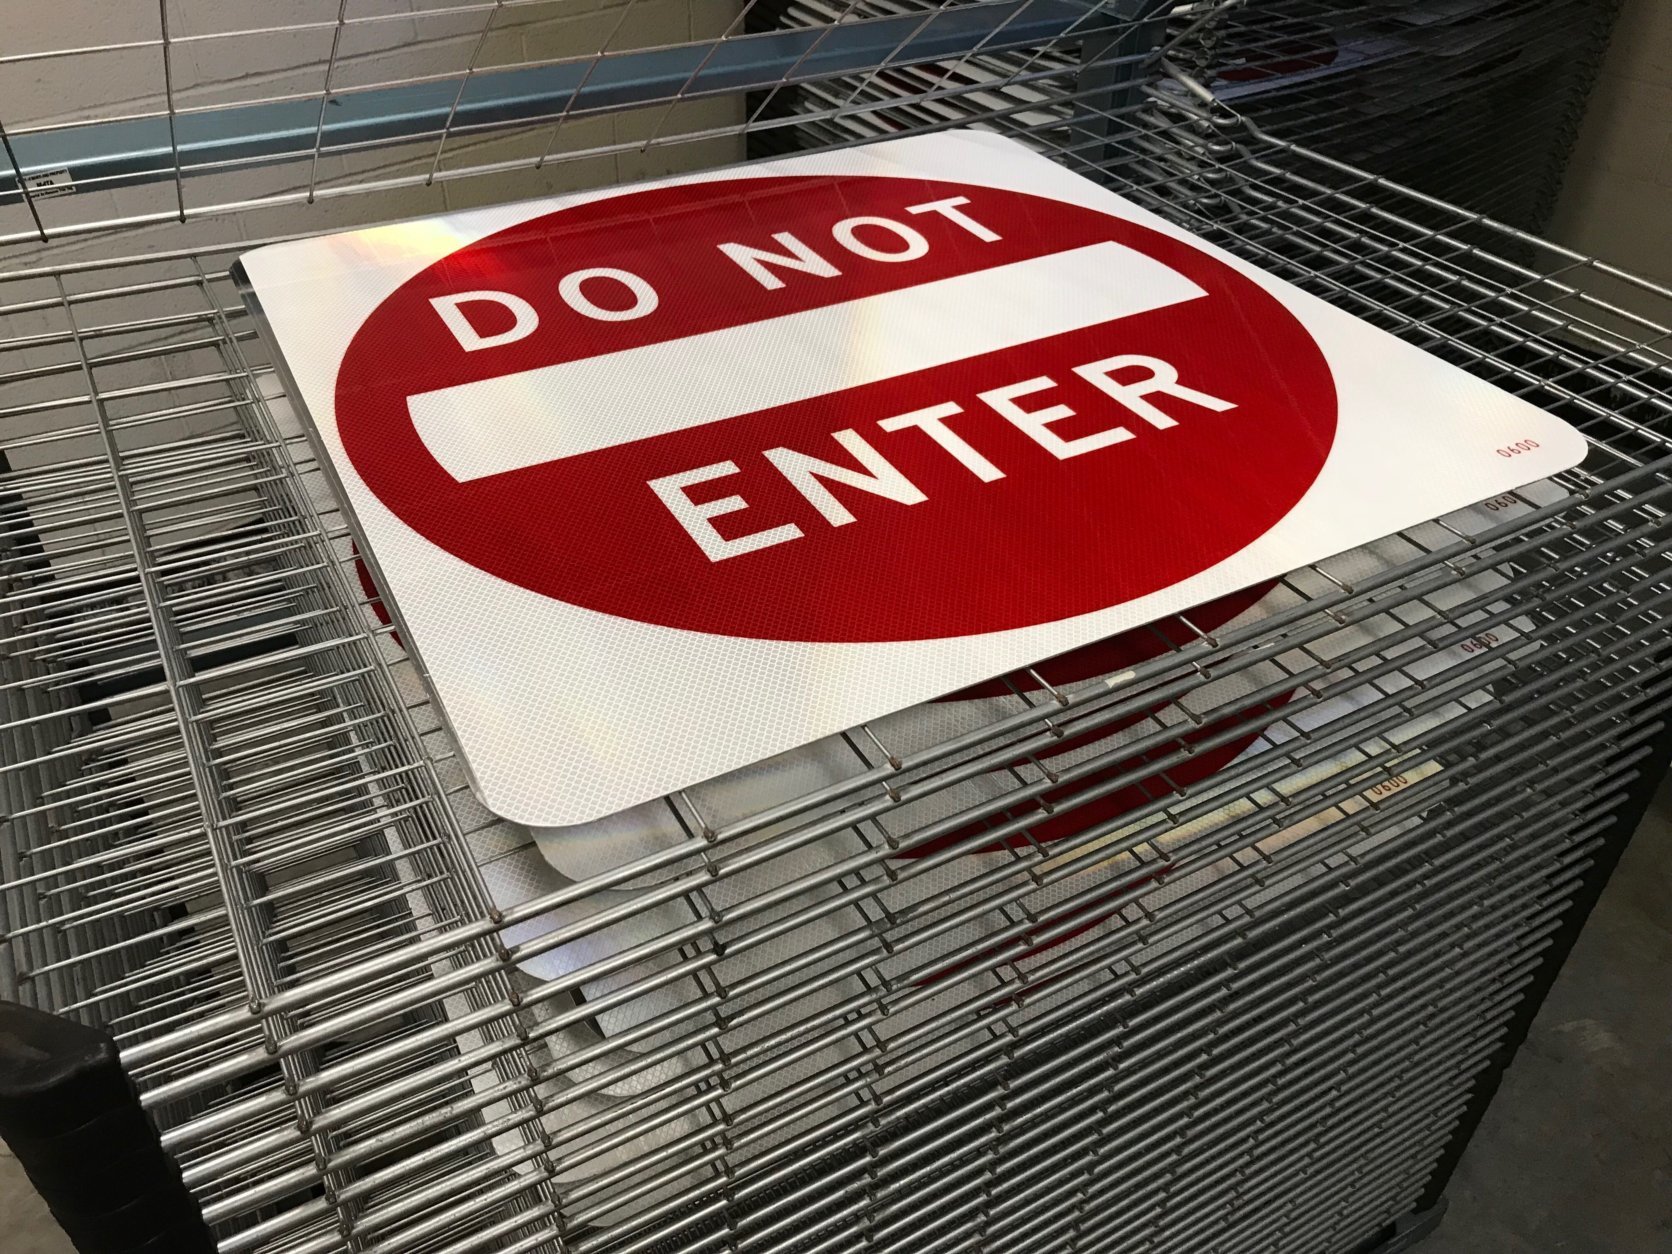 Screen-printed signs are placed on a rack to dry. (WTOP/Michelle Basch)